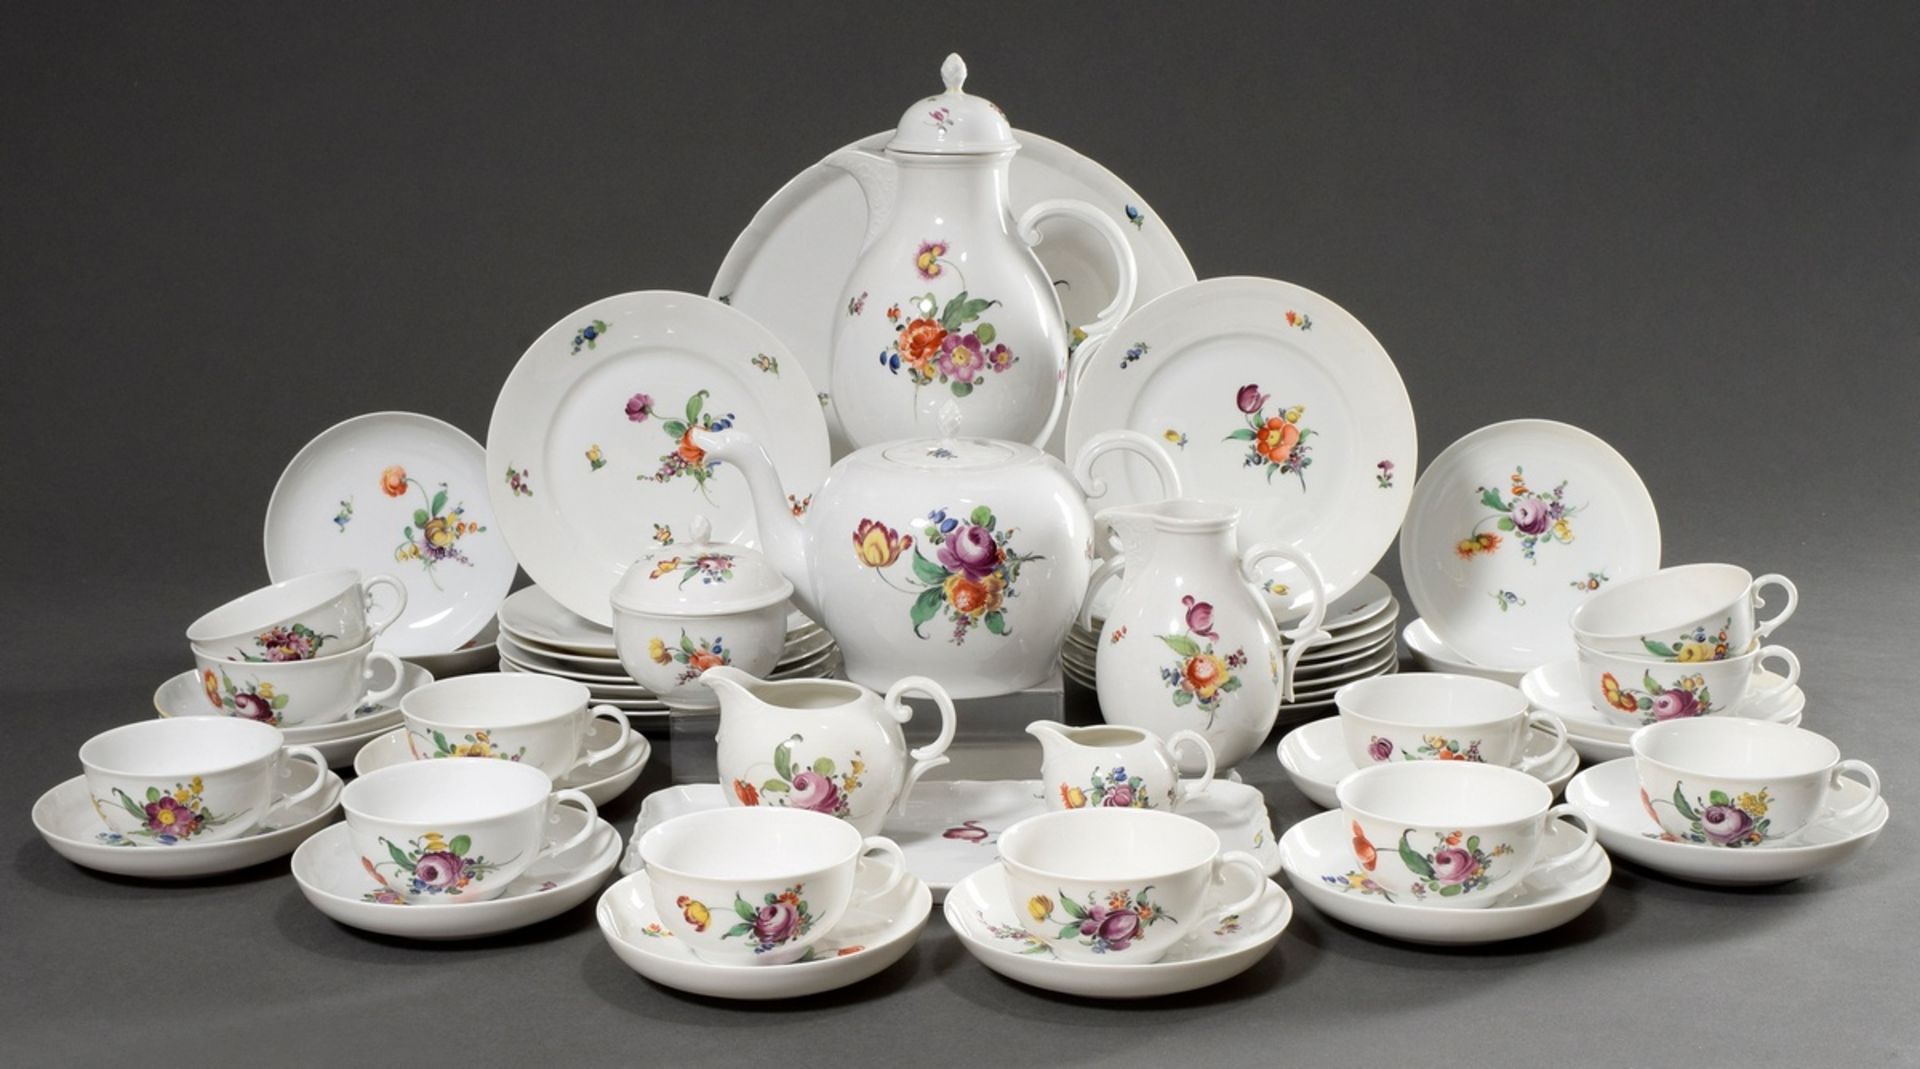 39 piece Nymphenburg coffee-tea service "Flower", 20th century, consisting of: 1 teapot with plasti - Image 2 of 4